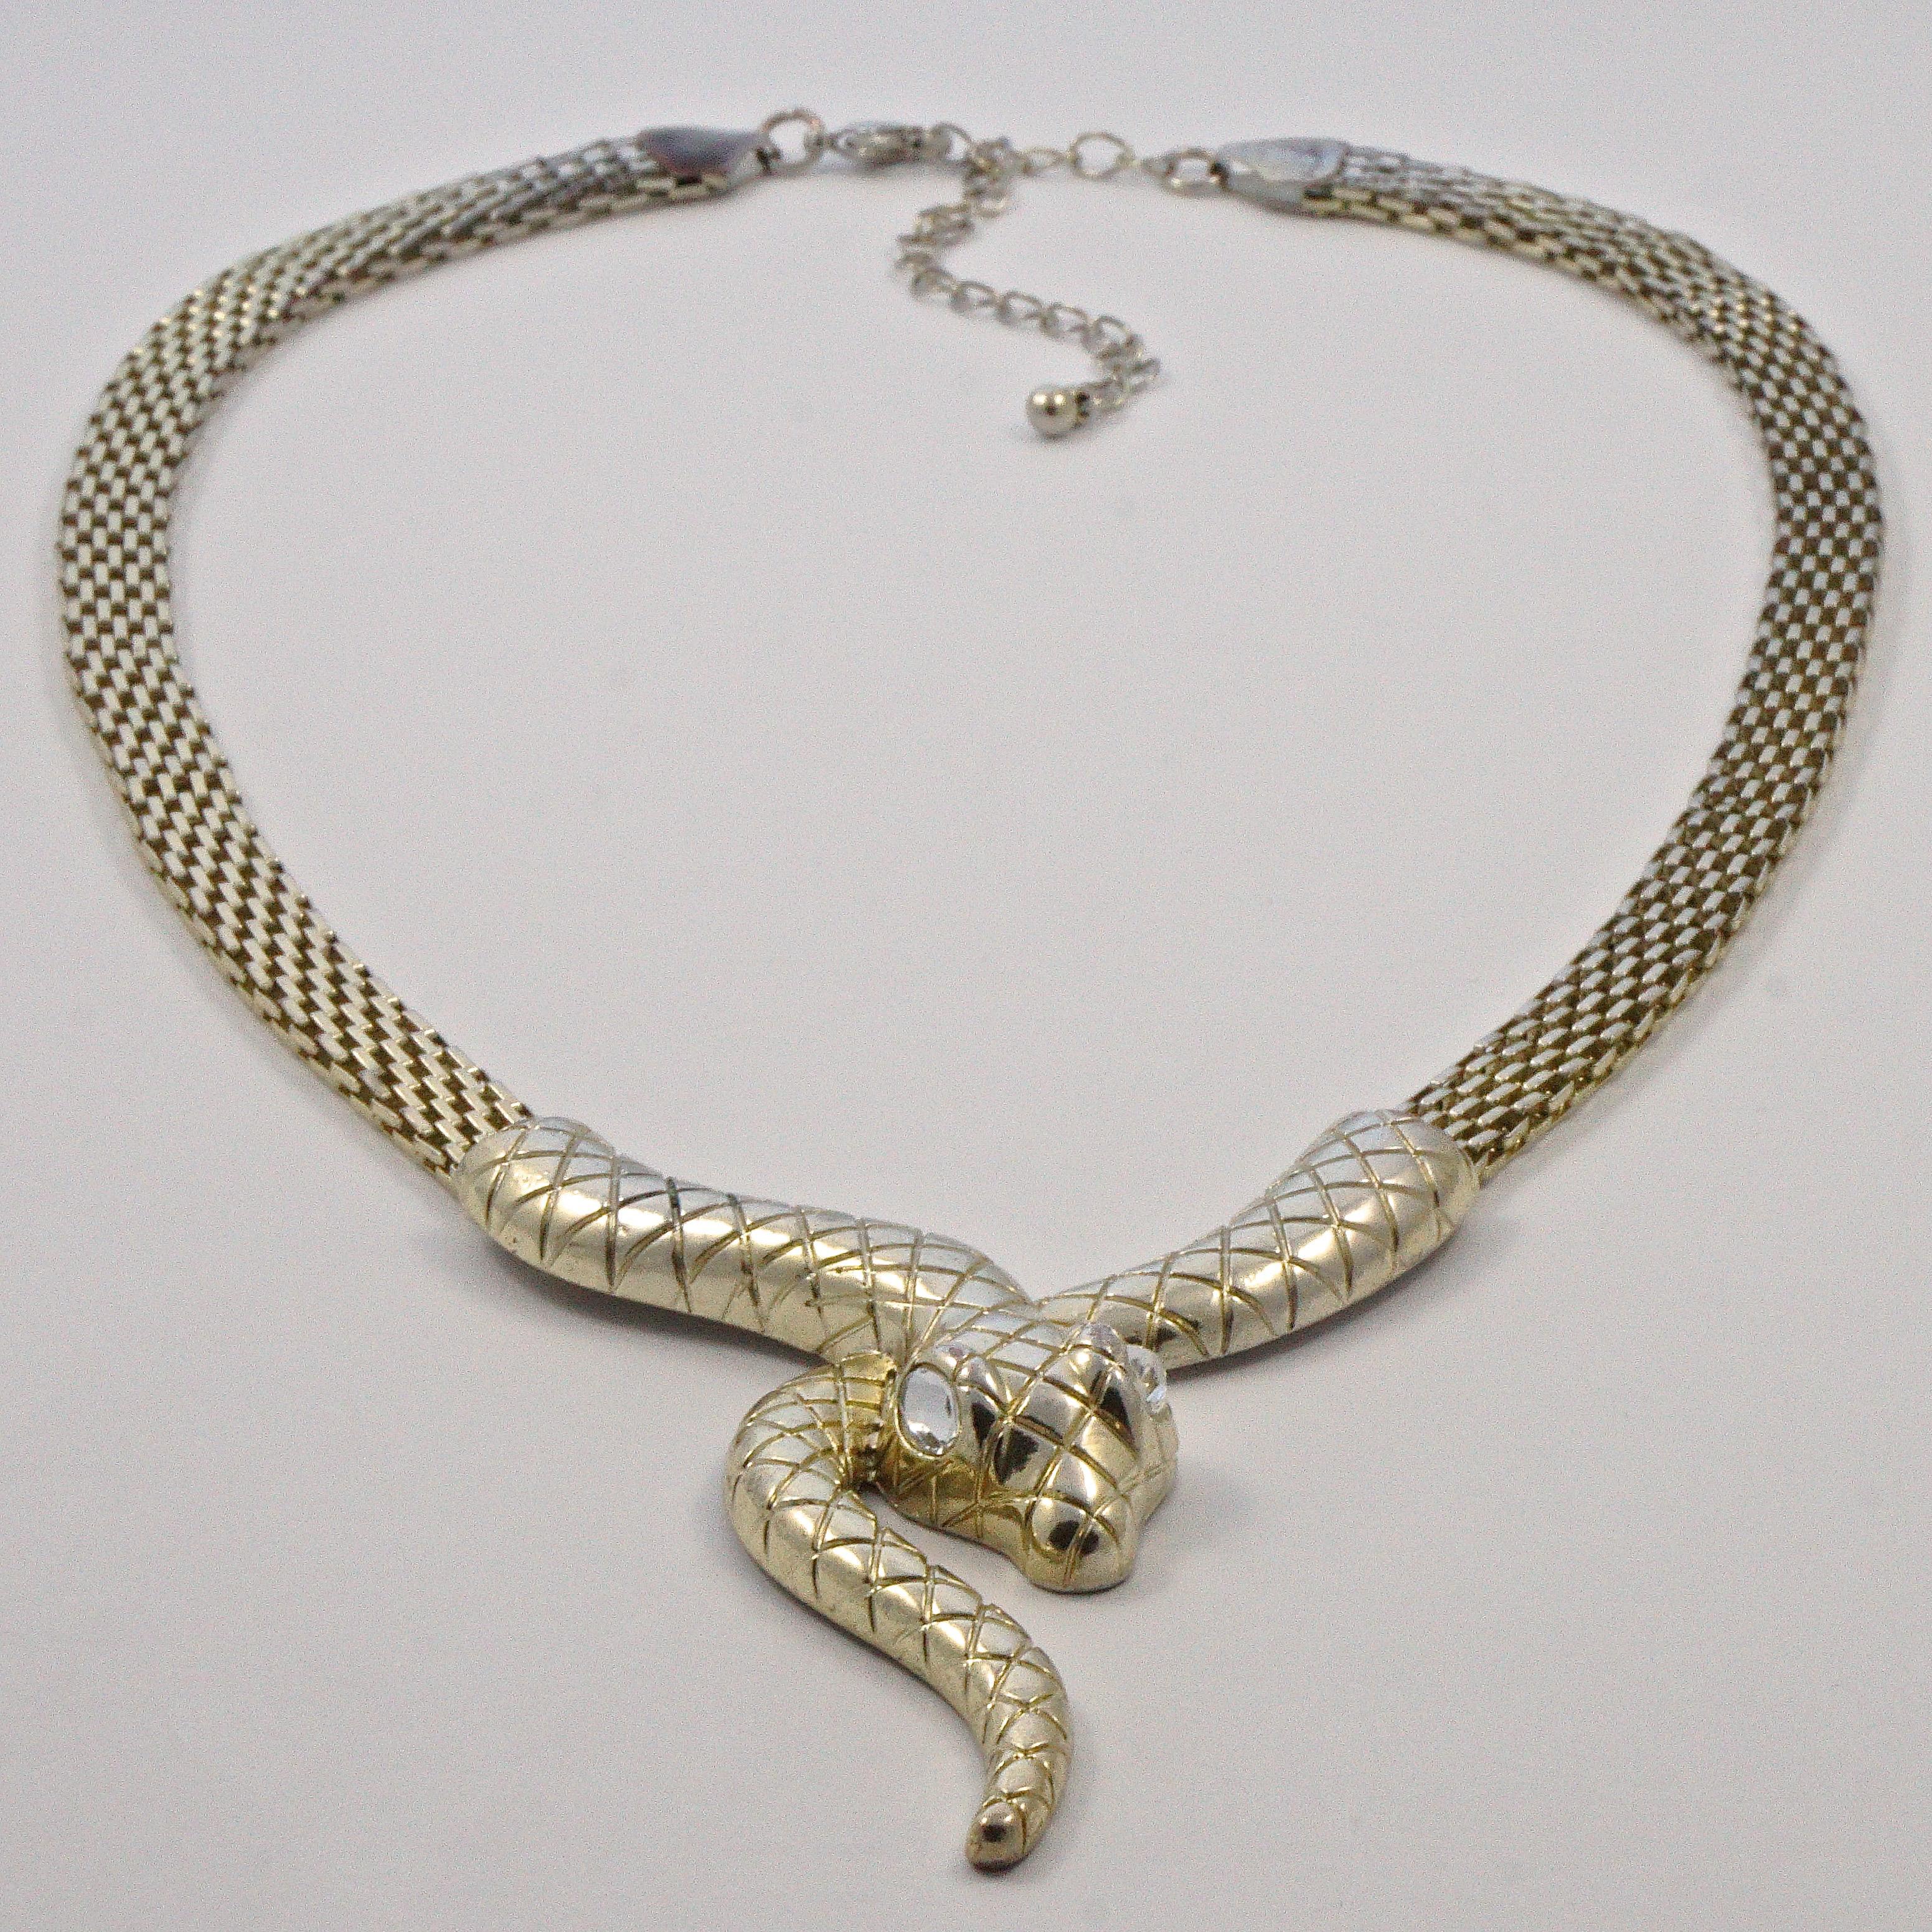 Women's or Men's Gold Plated Mesh Link Snake Necklace with Clear Rhinestone Eyes circa 1980s